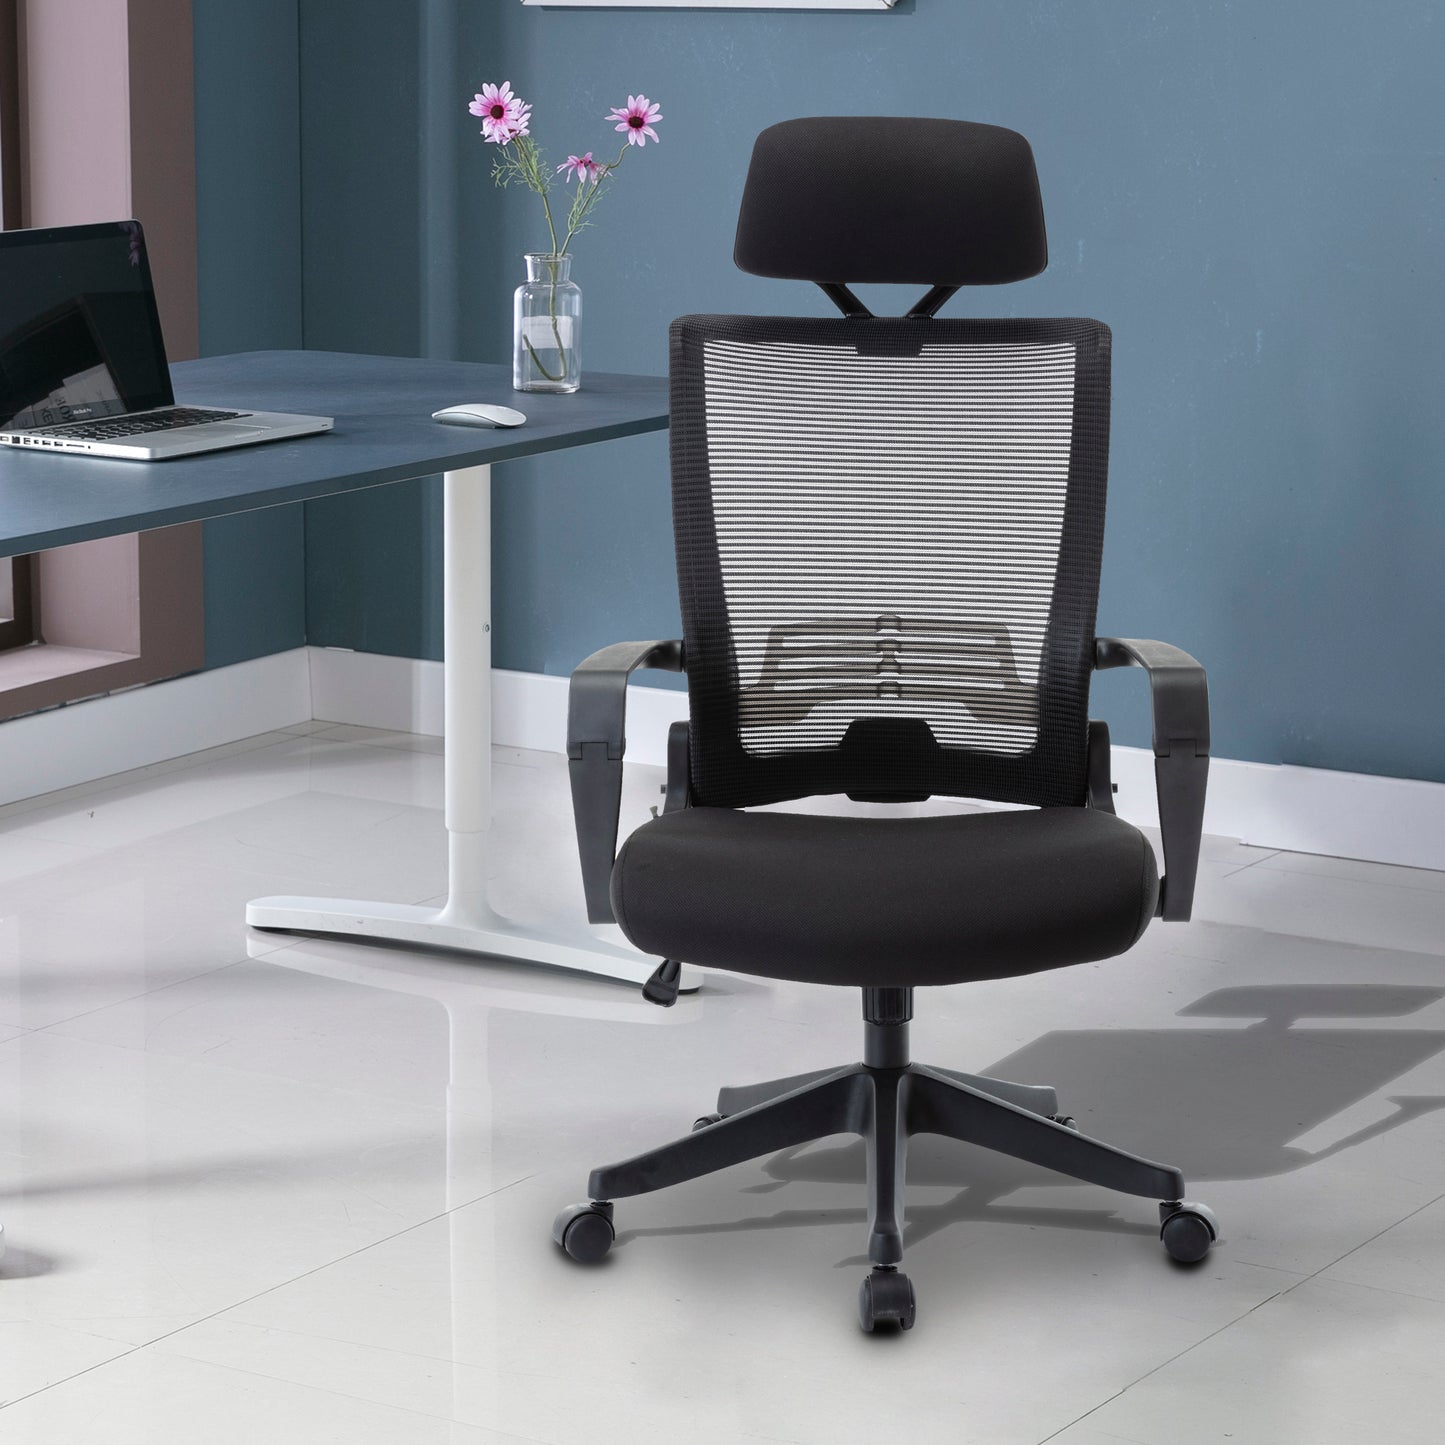 Mesh Office Chair, High Back Chair - Adjustable Headrest with Arms, Lumbar Support